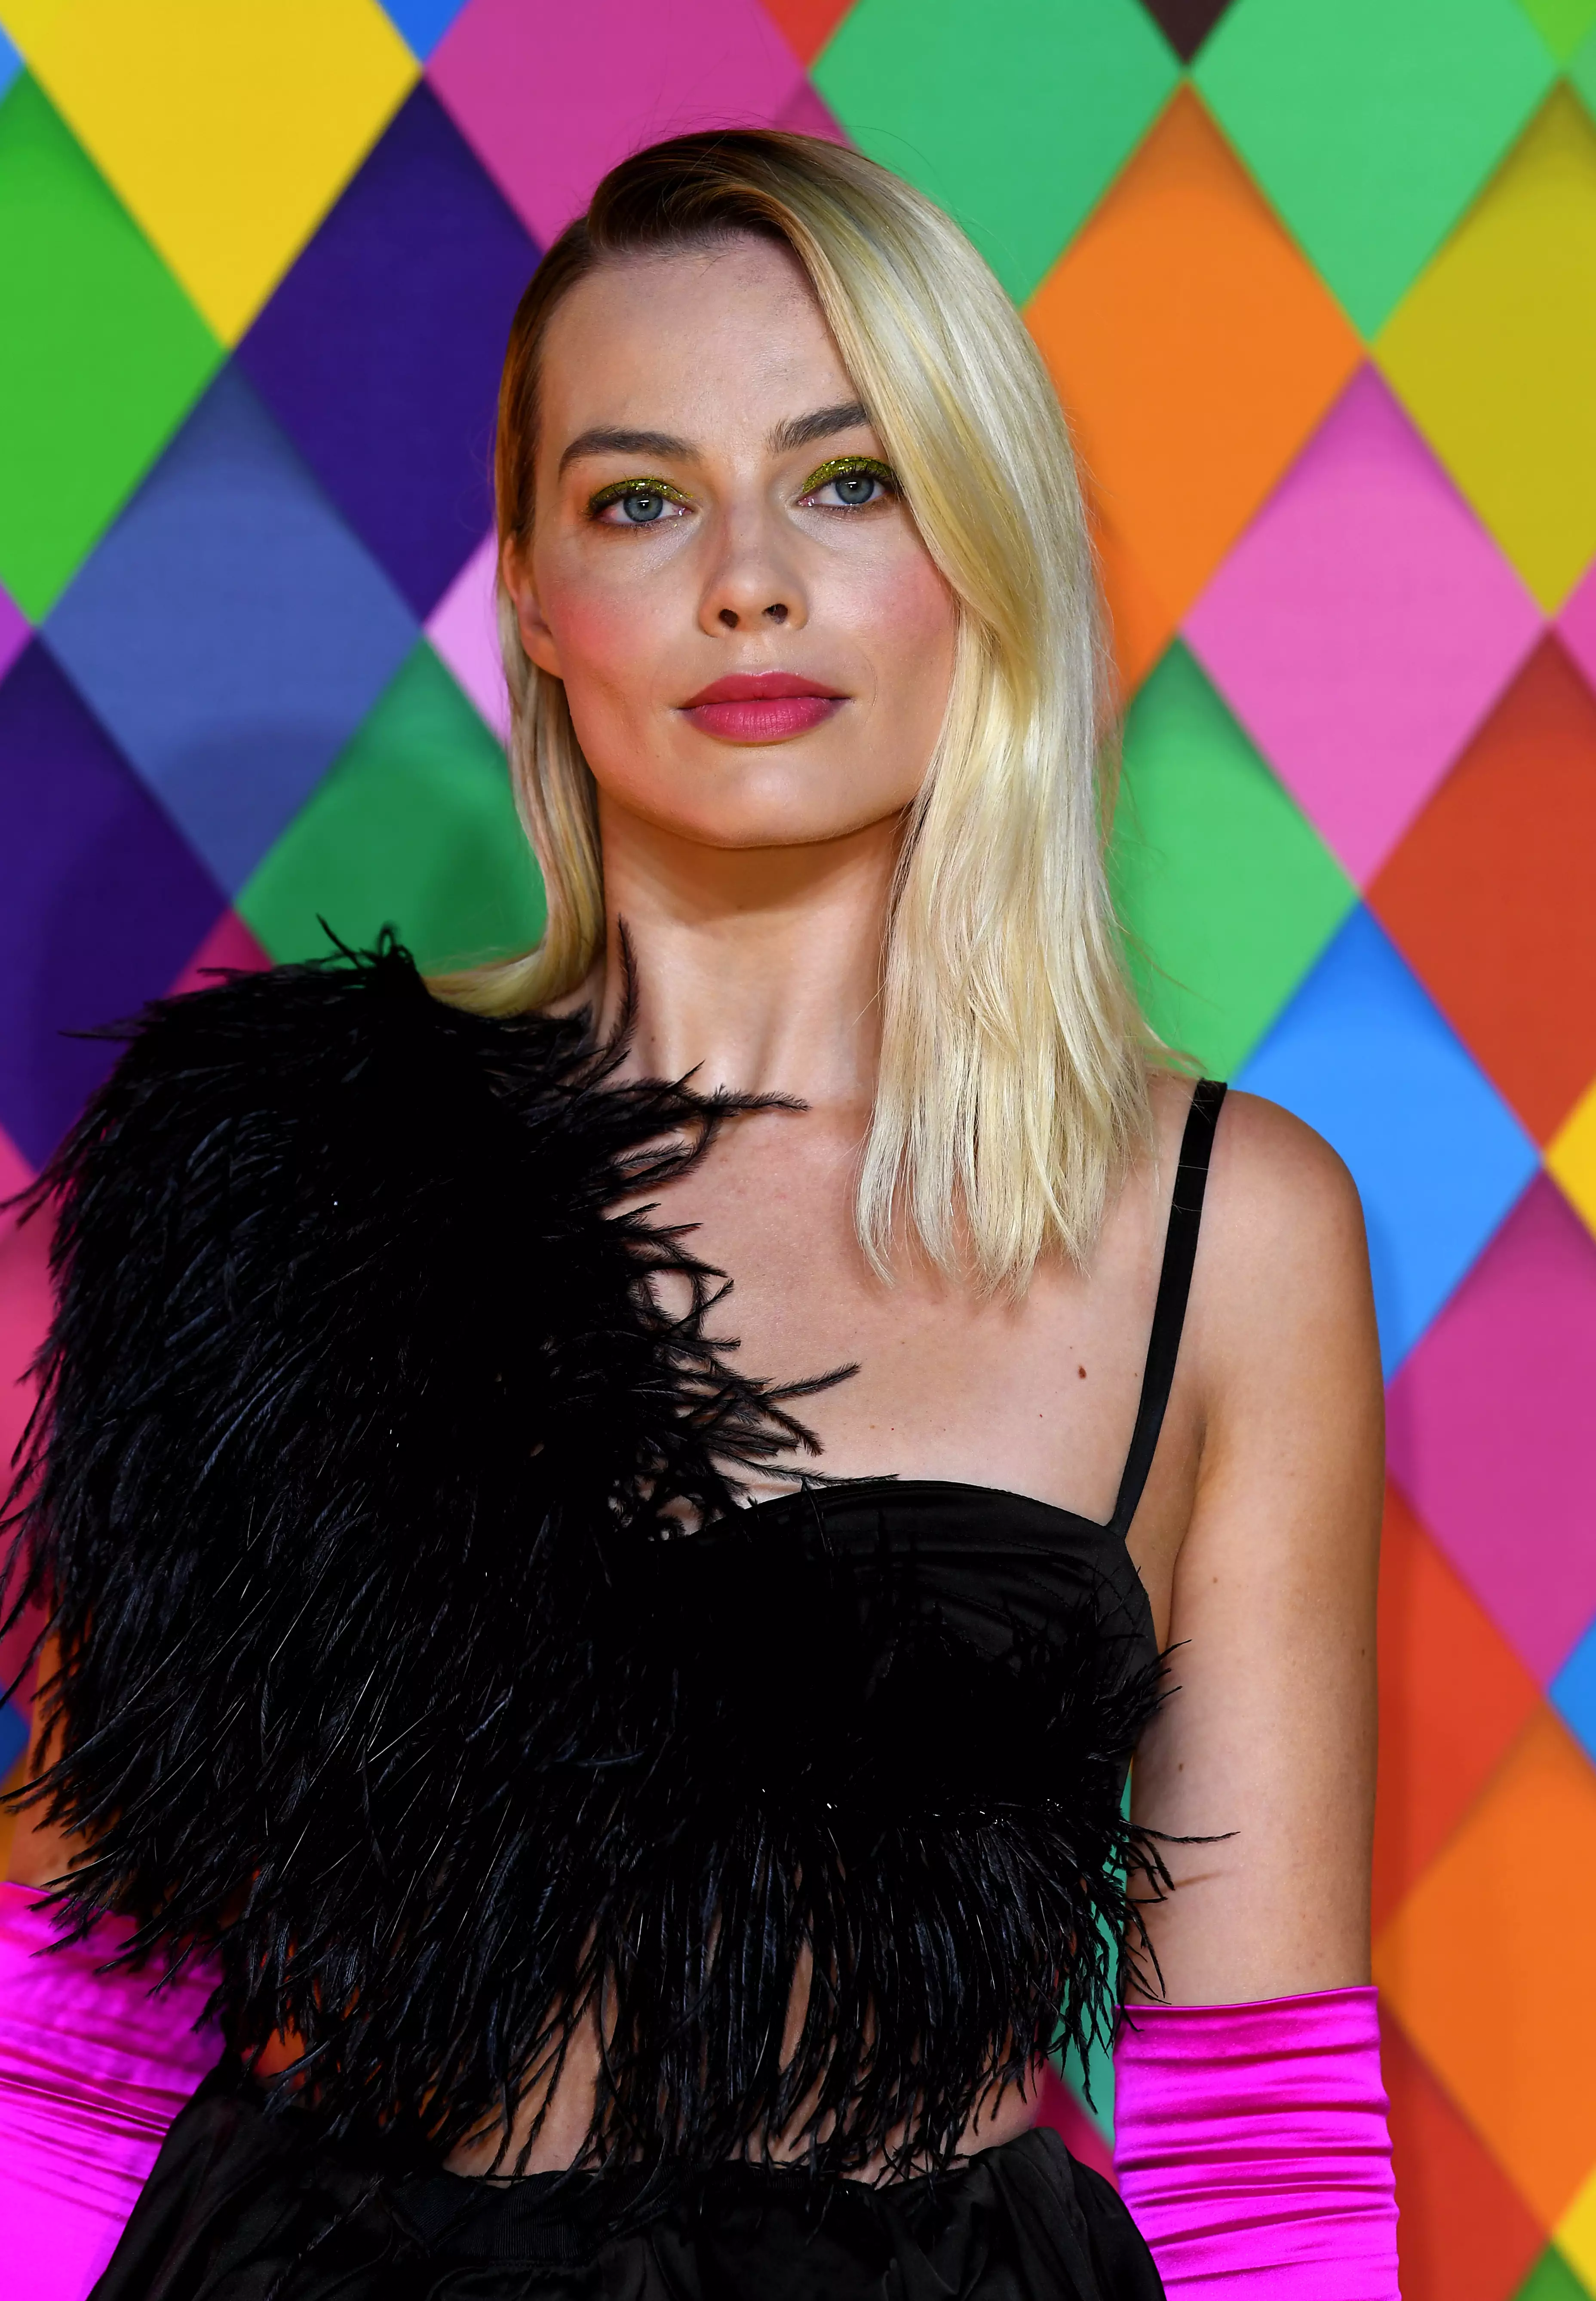 Margot Robbie is set to star in an all-female reboot of Pirates of the Caribbean.